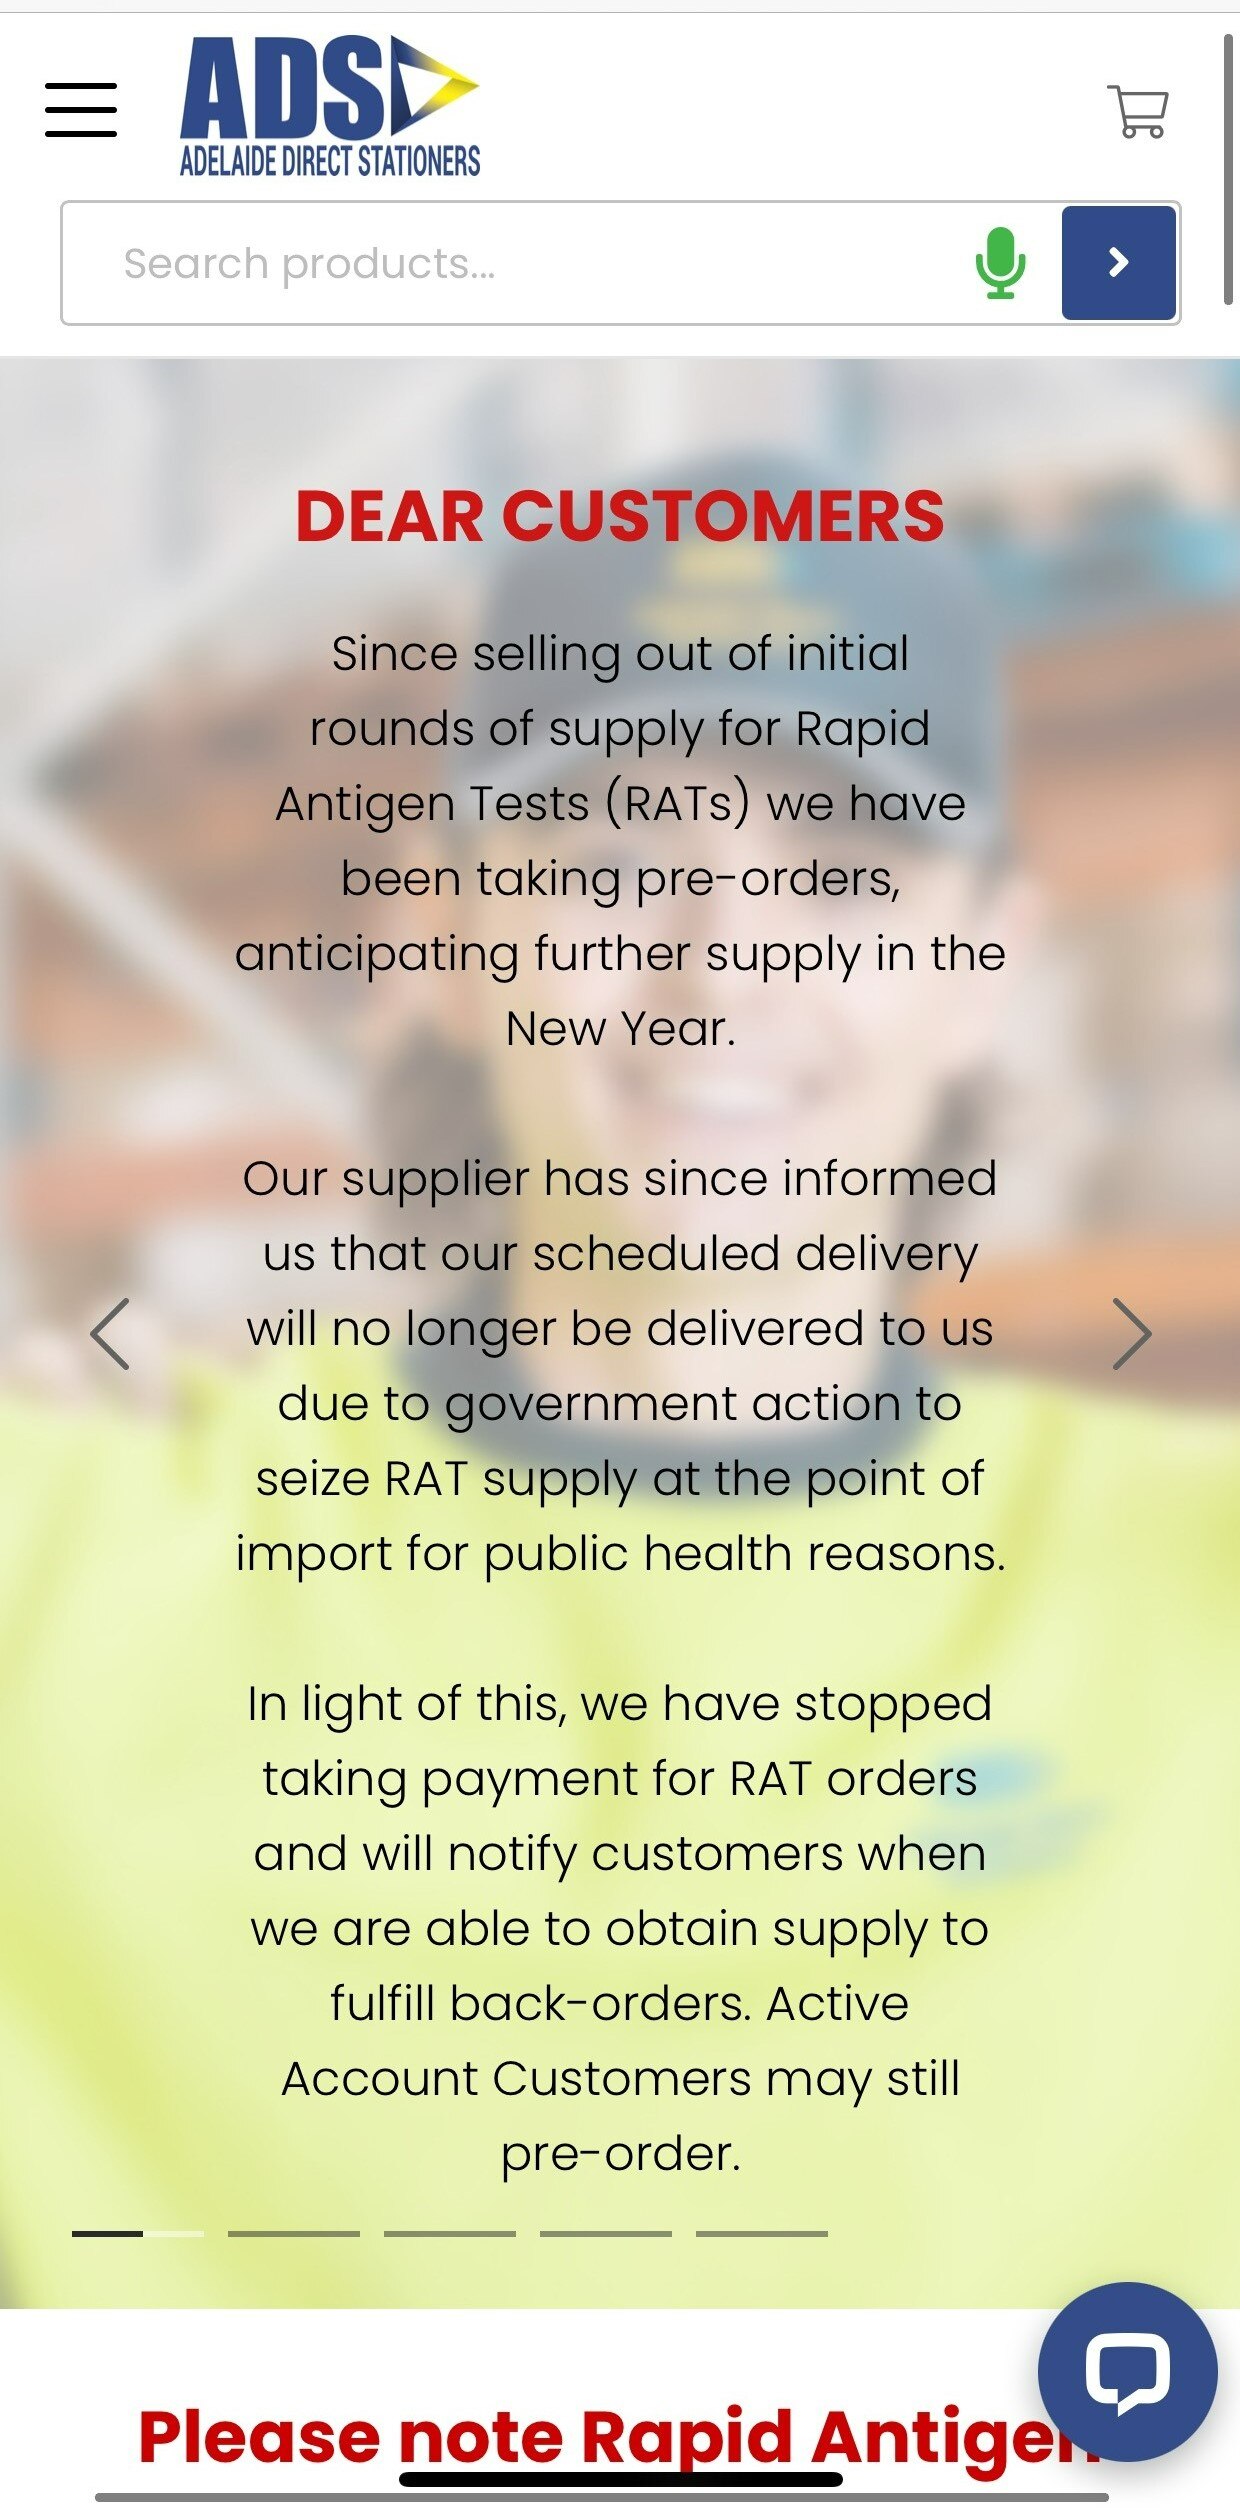 Message posted by Adelaide Direct Stationers on its website.